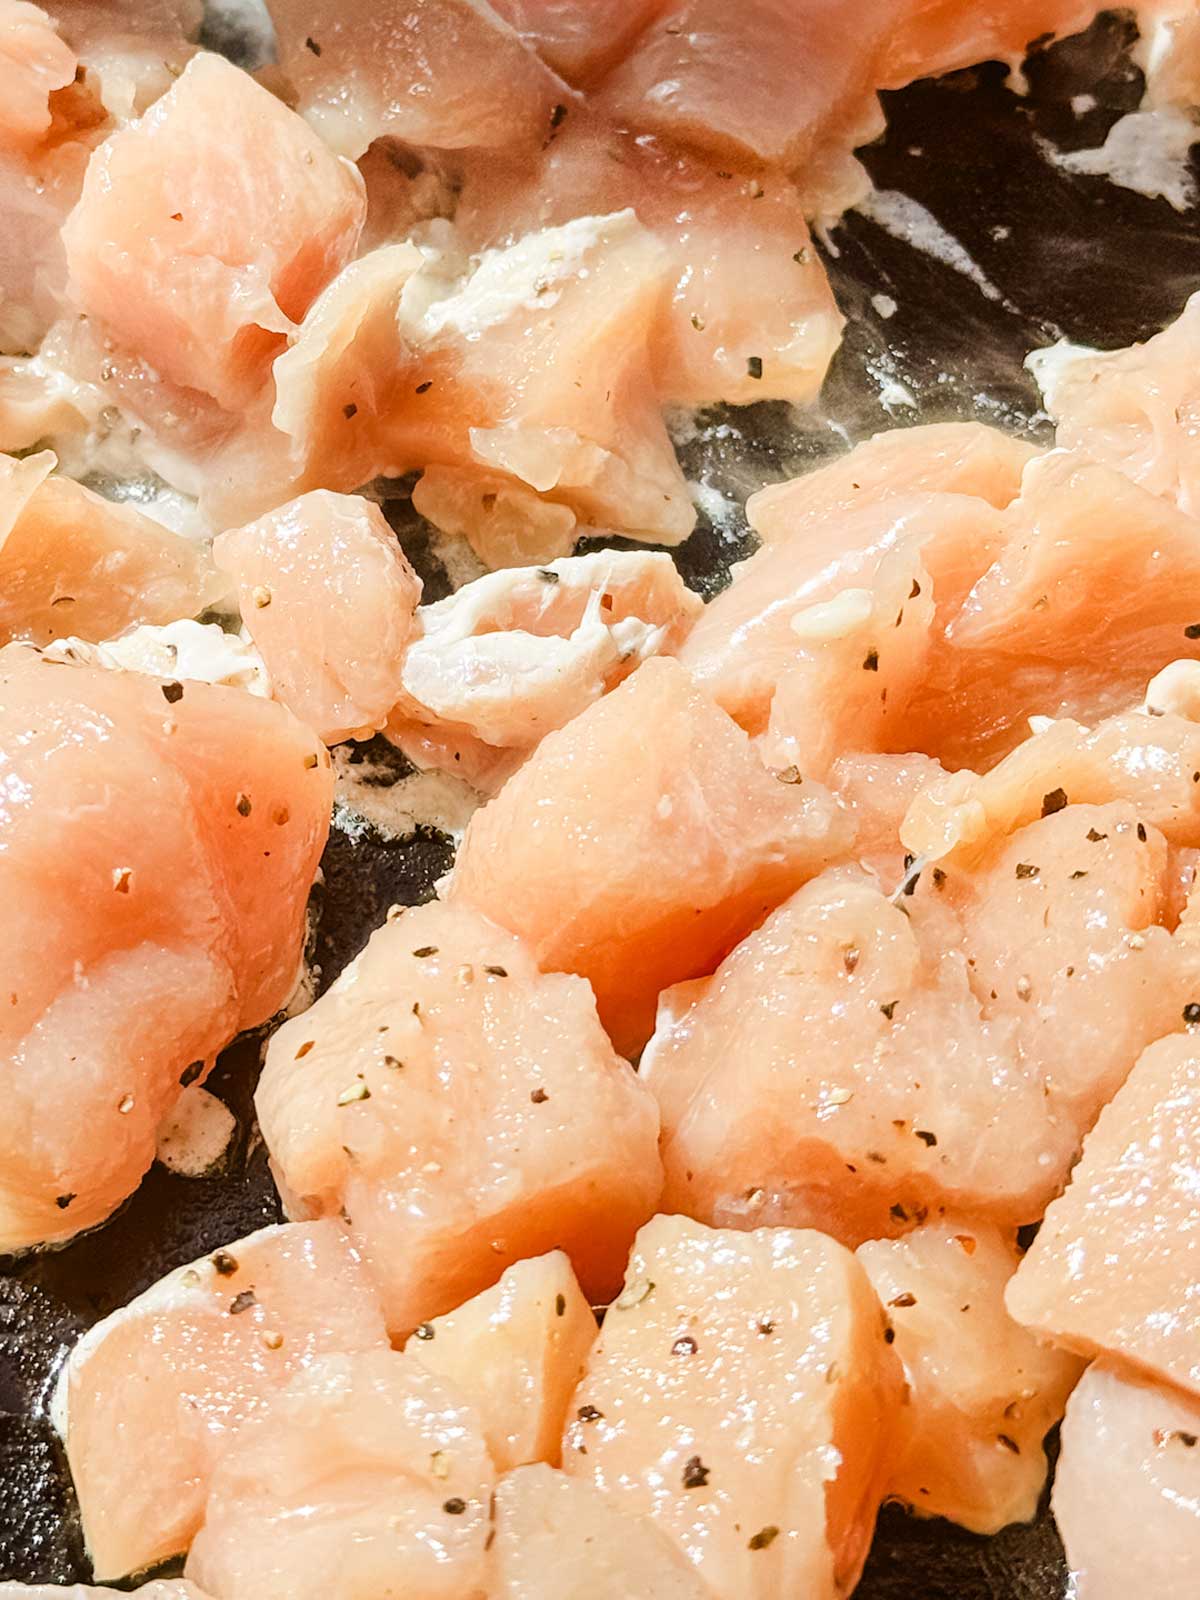 Diced chicken on a flat top griddle.